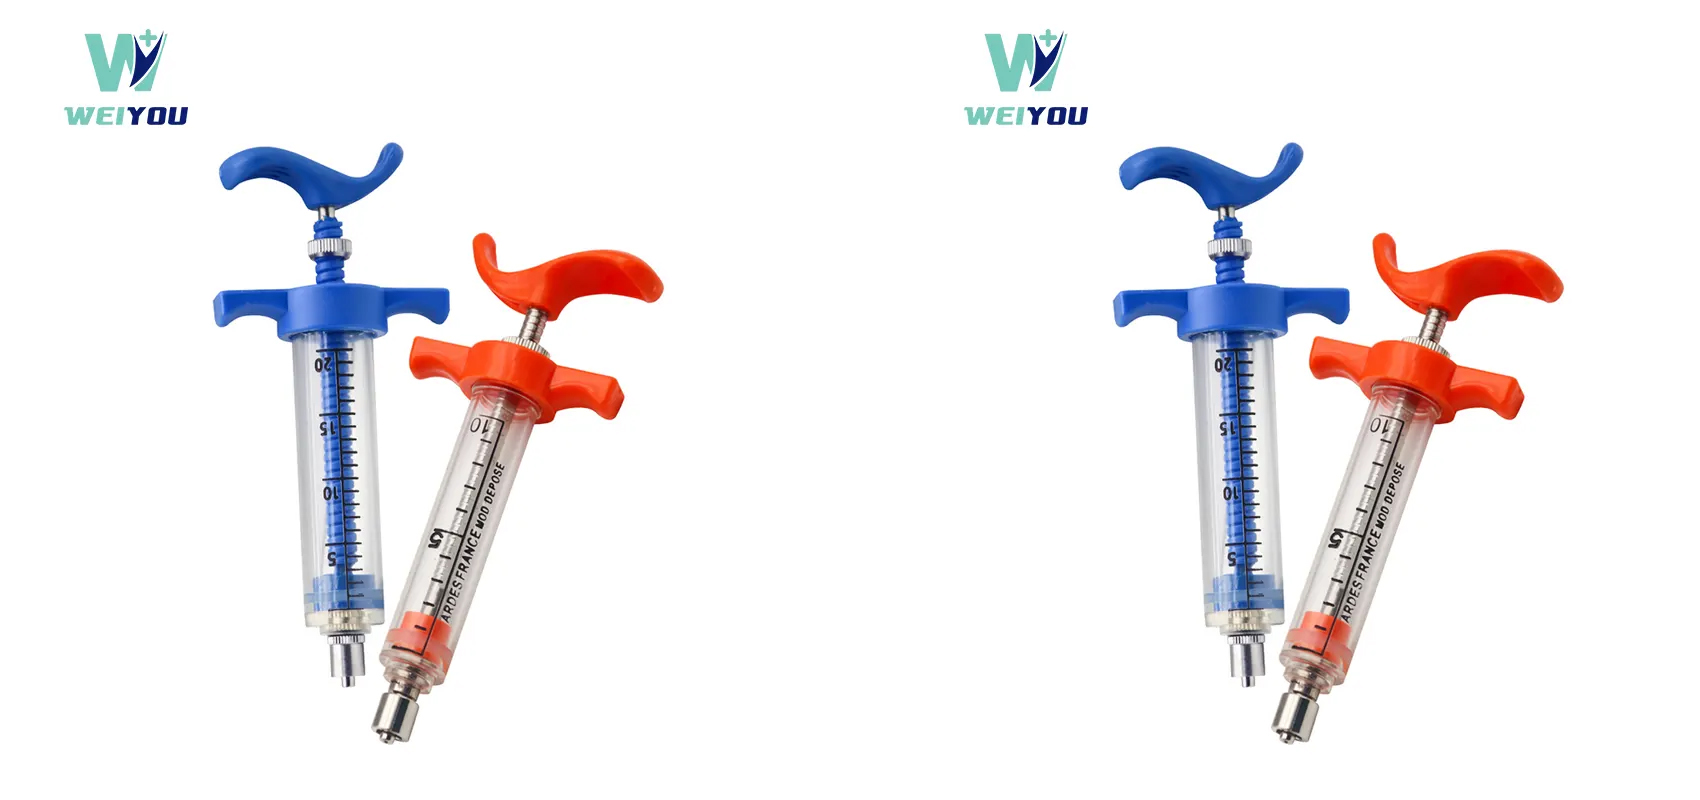 The difference between veterinary plastic steel syringe and continuous syringe